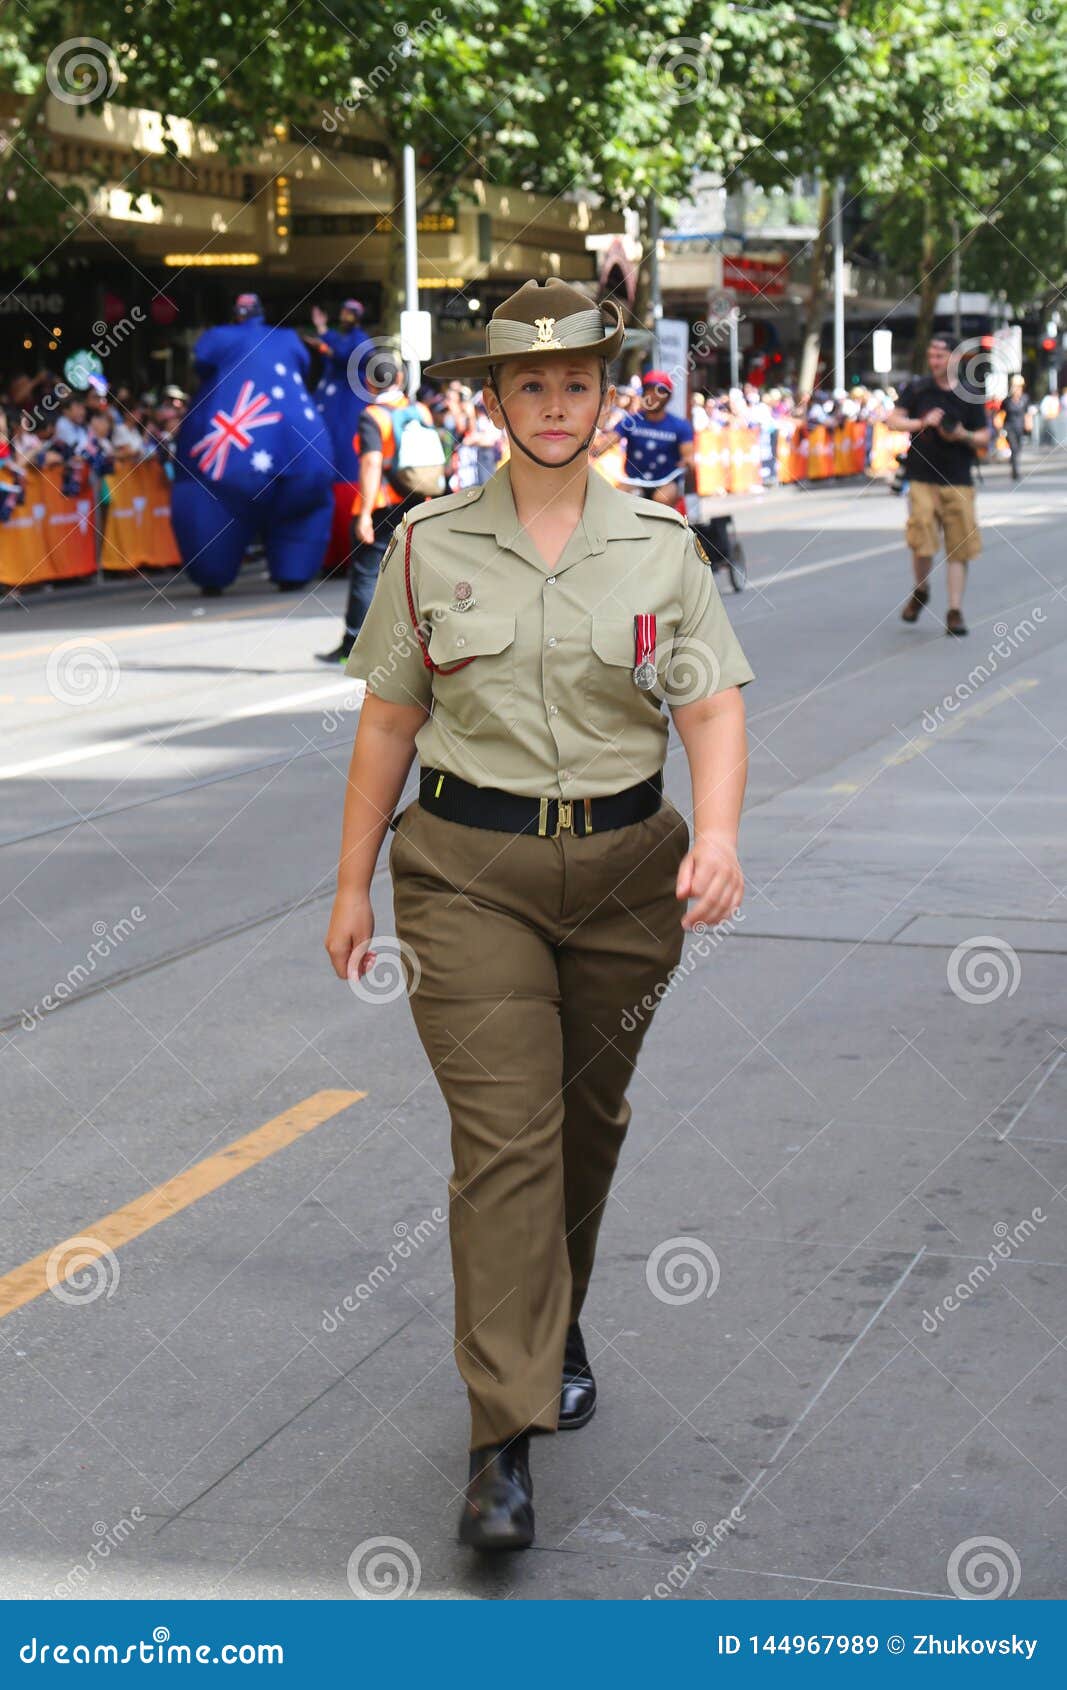 Australian Army Participate at 2019 Australia Day Parade in Melbourne Editorial Stock Image - Image of culture, celebrate: 144967989